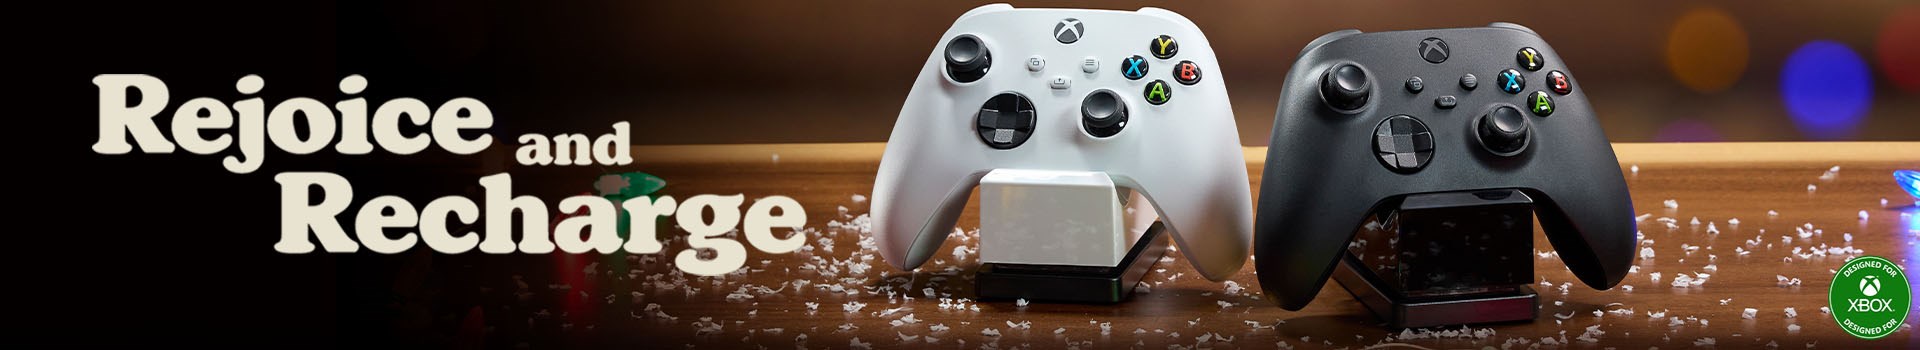 Rejoice and Recharge - Chargers for Xbox on a snowy table